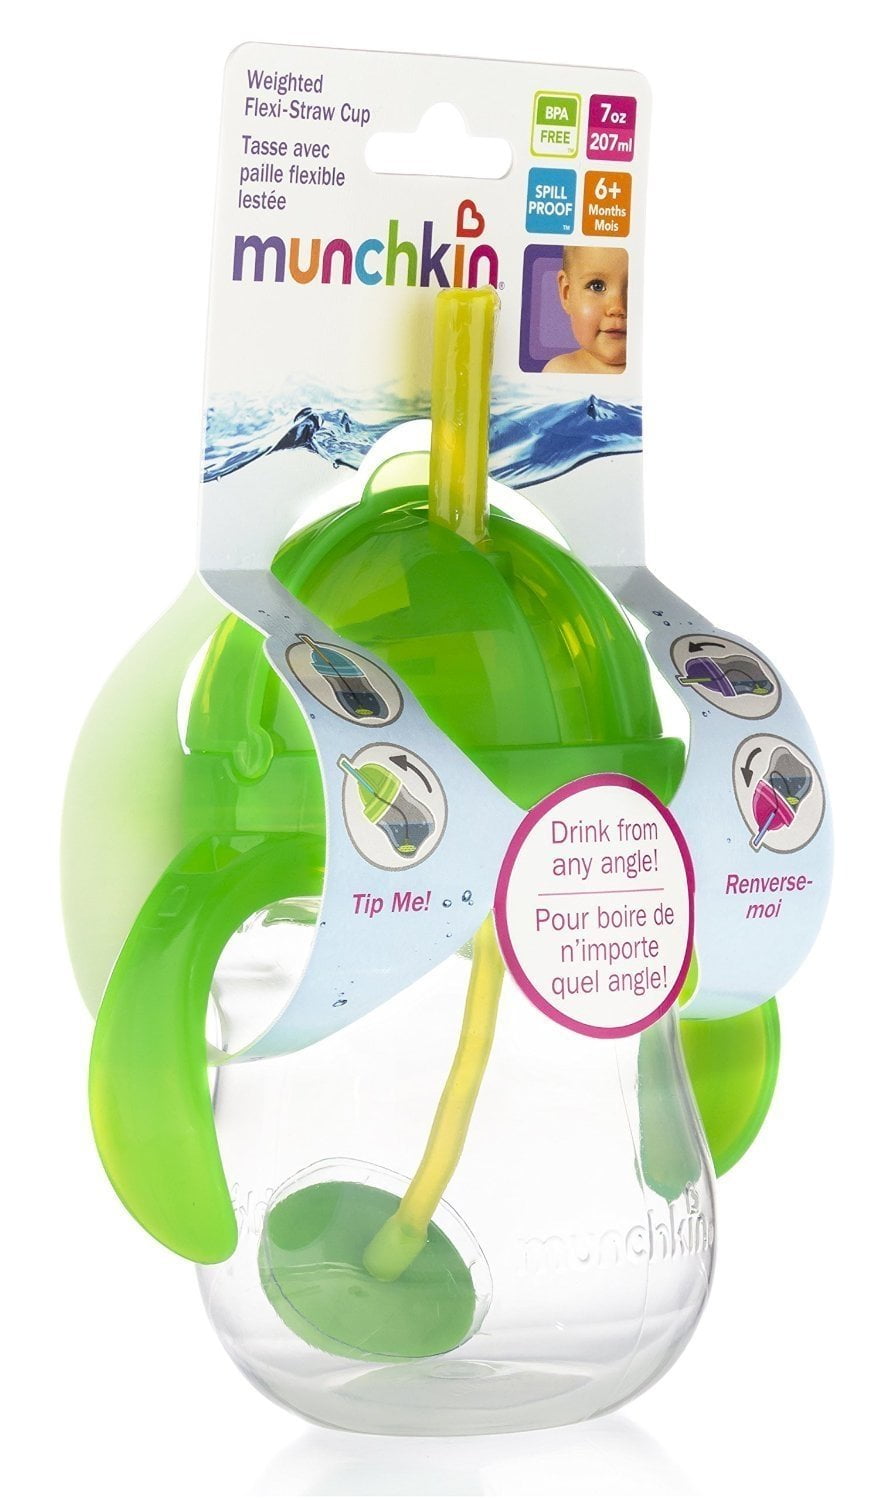 7 oz/207 ml Munchkin Click Lock Tip and Sip Weighted Flexi Straw Cup Pack of 2 Blue/Green